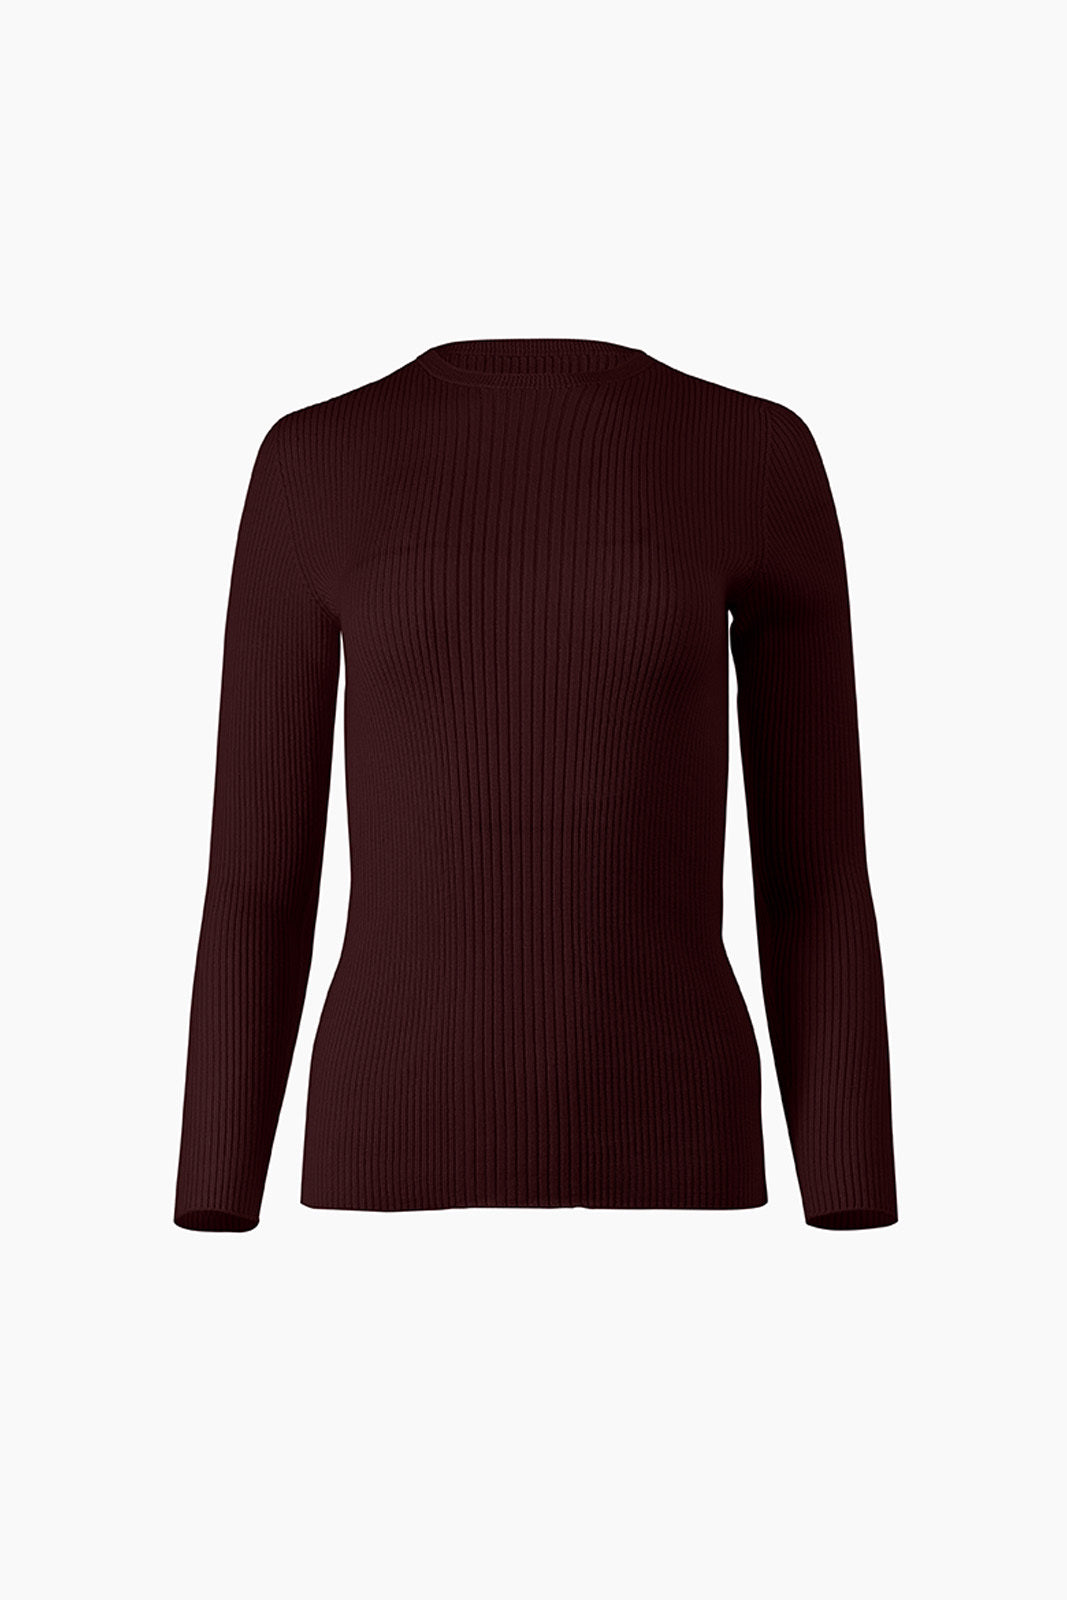 KASS CREW RIBBED PULLOVER - BEET